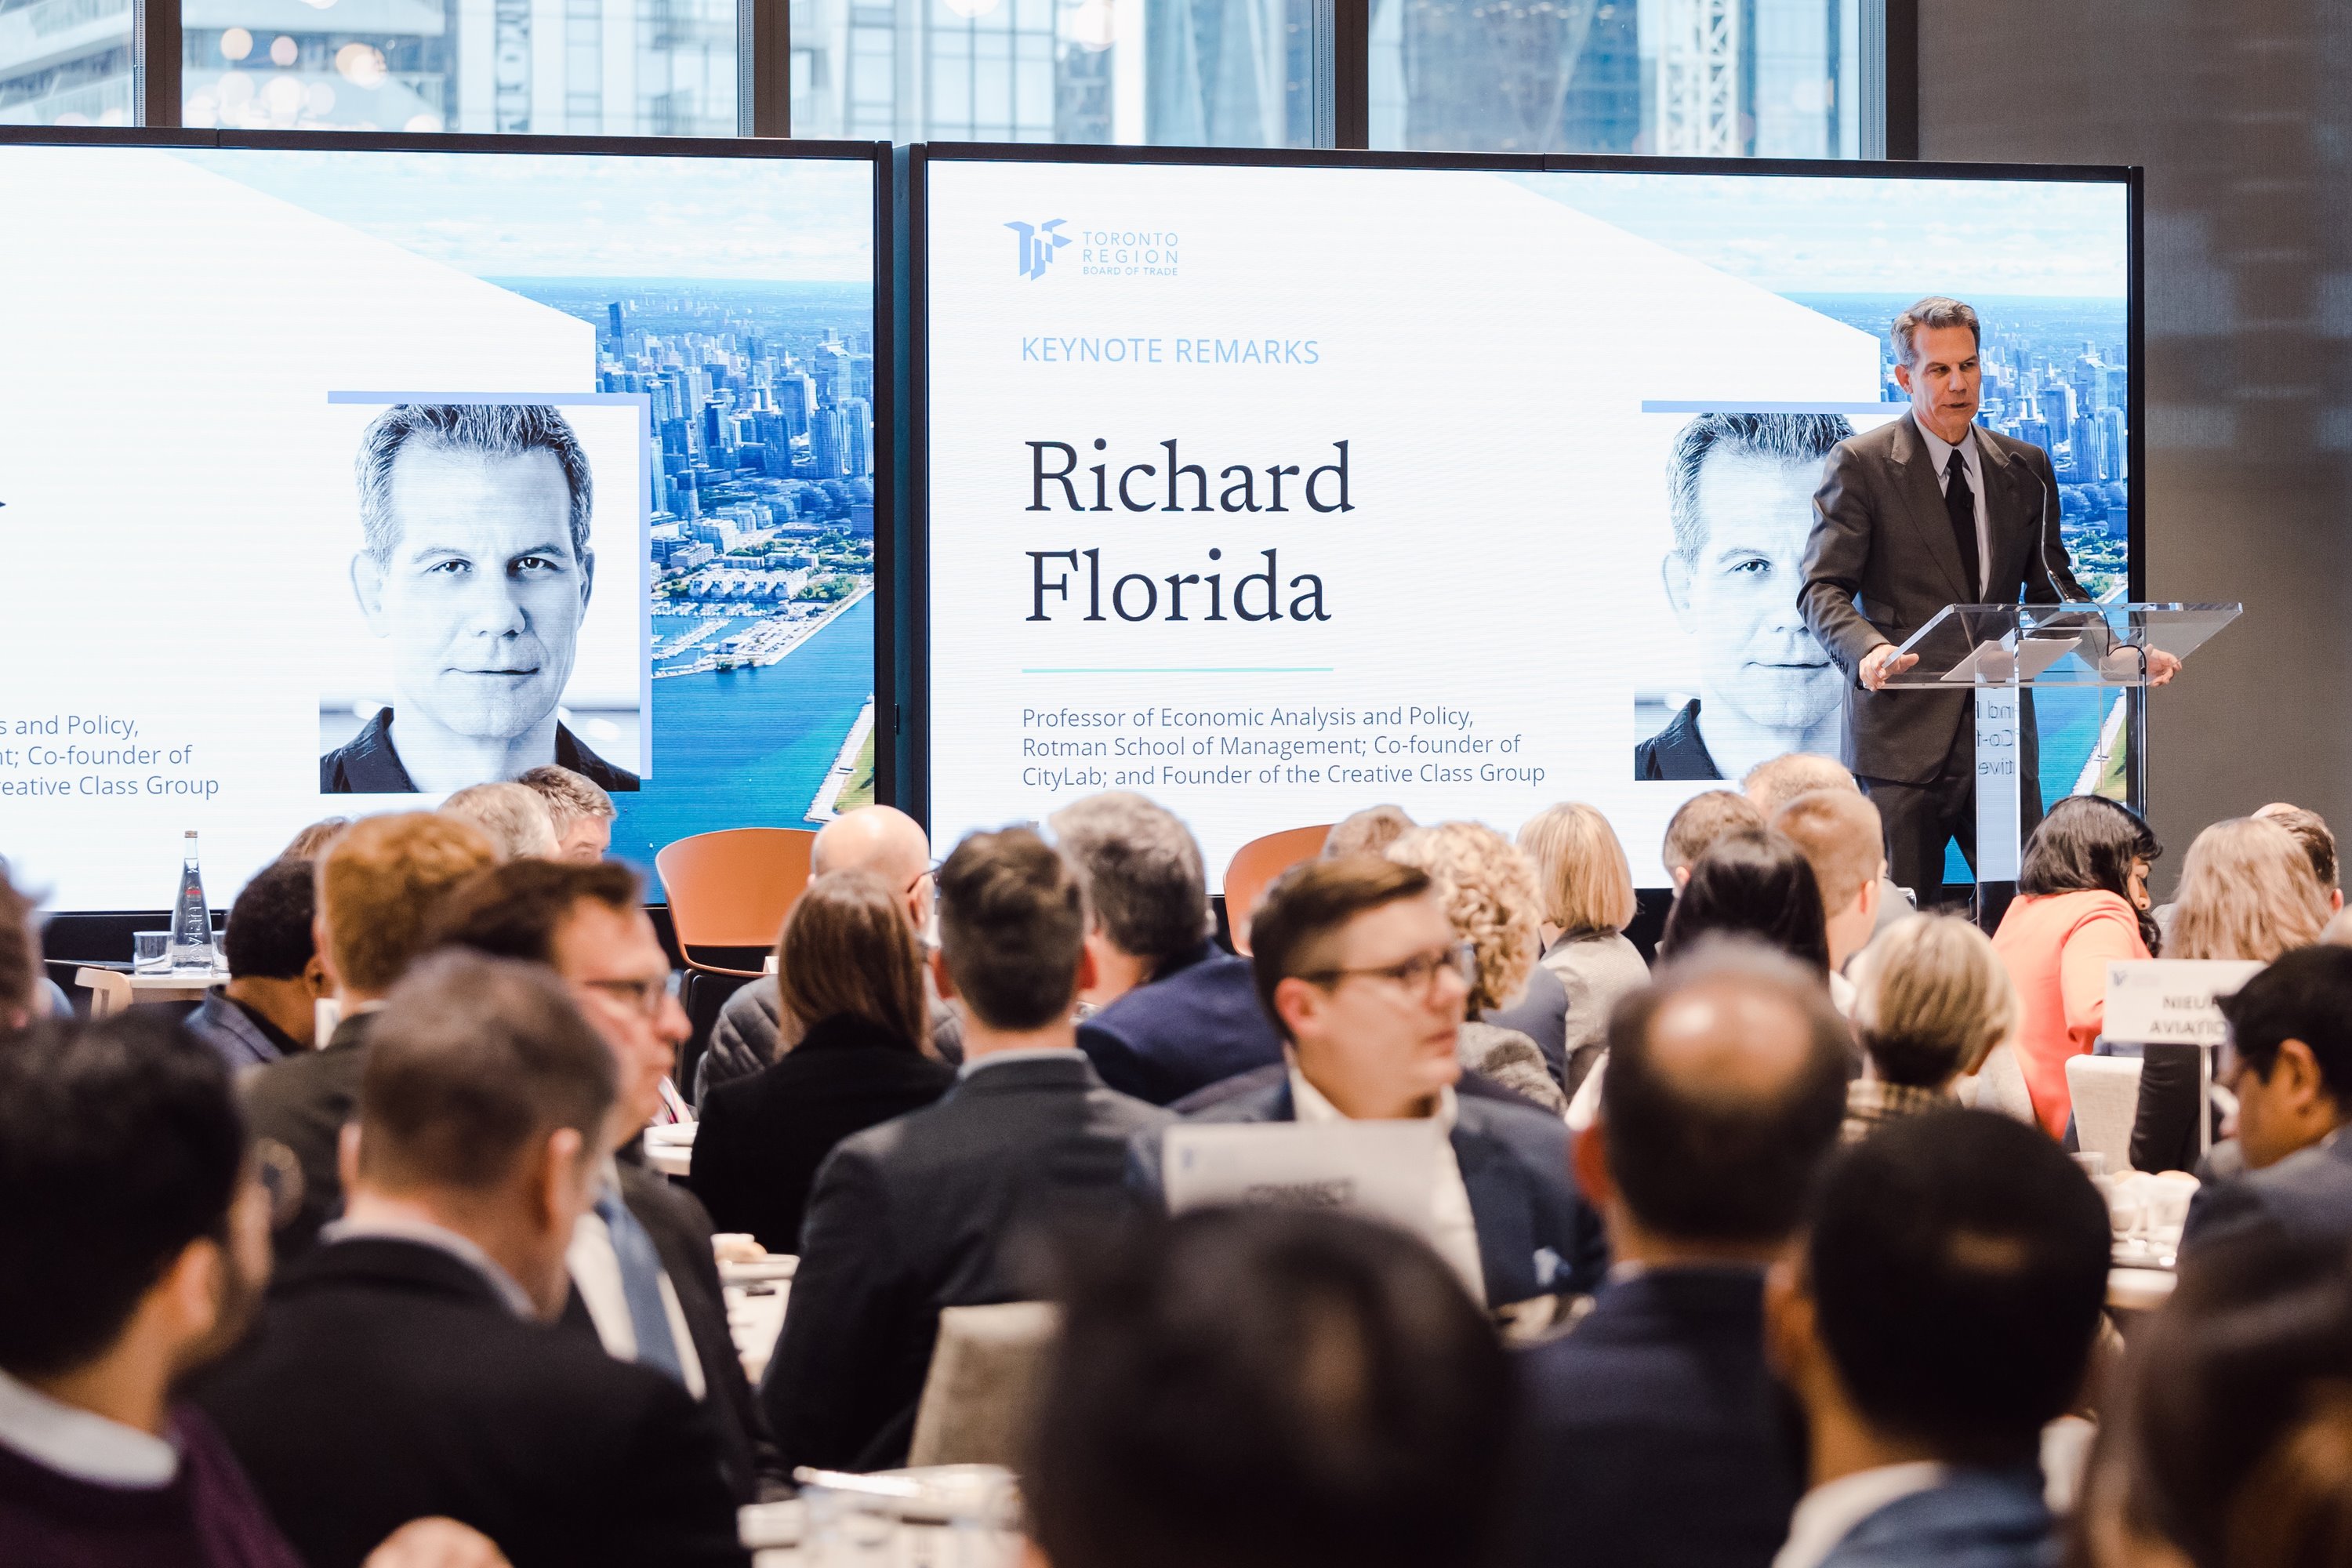 Richard Florida addressing the capacity crowd at our Inflection Point event.